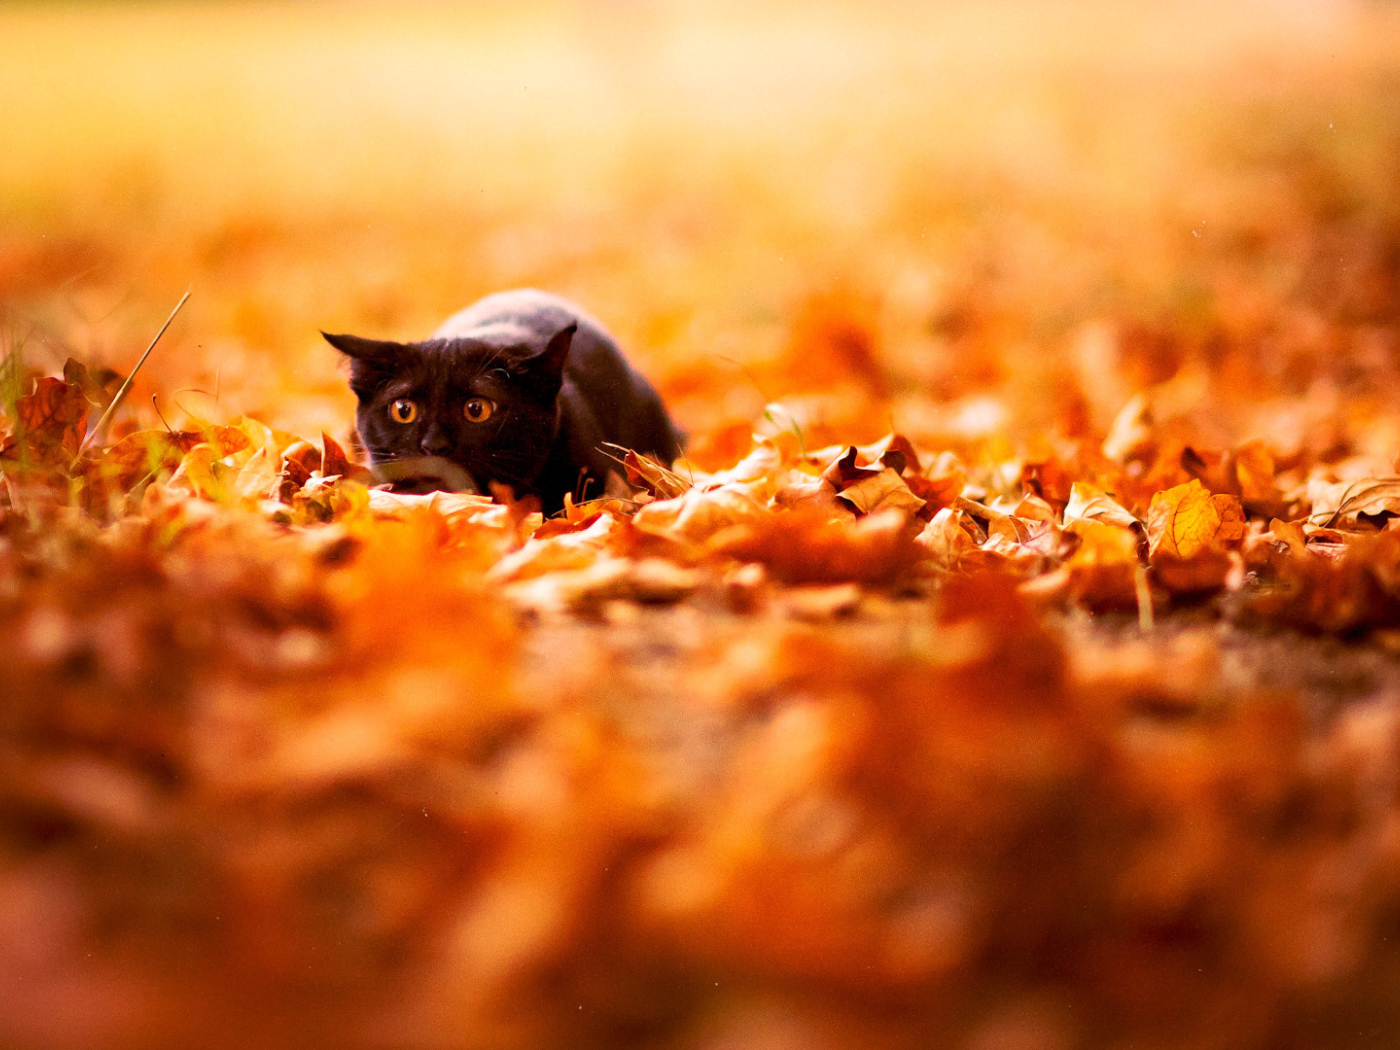 A small black cat hunting in autumn